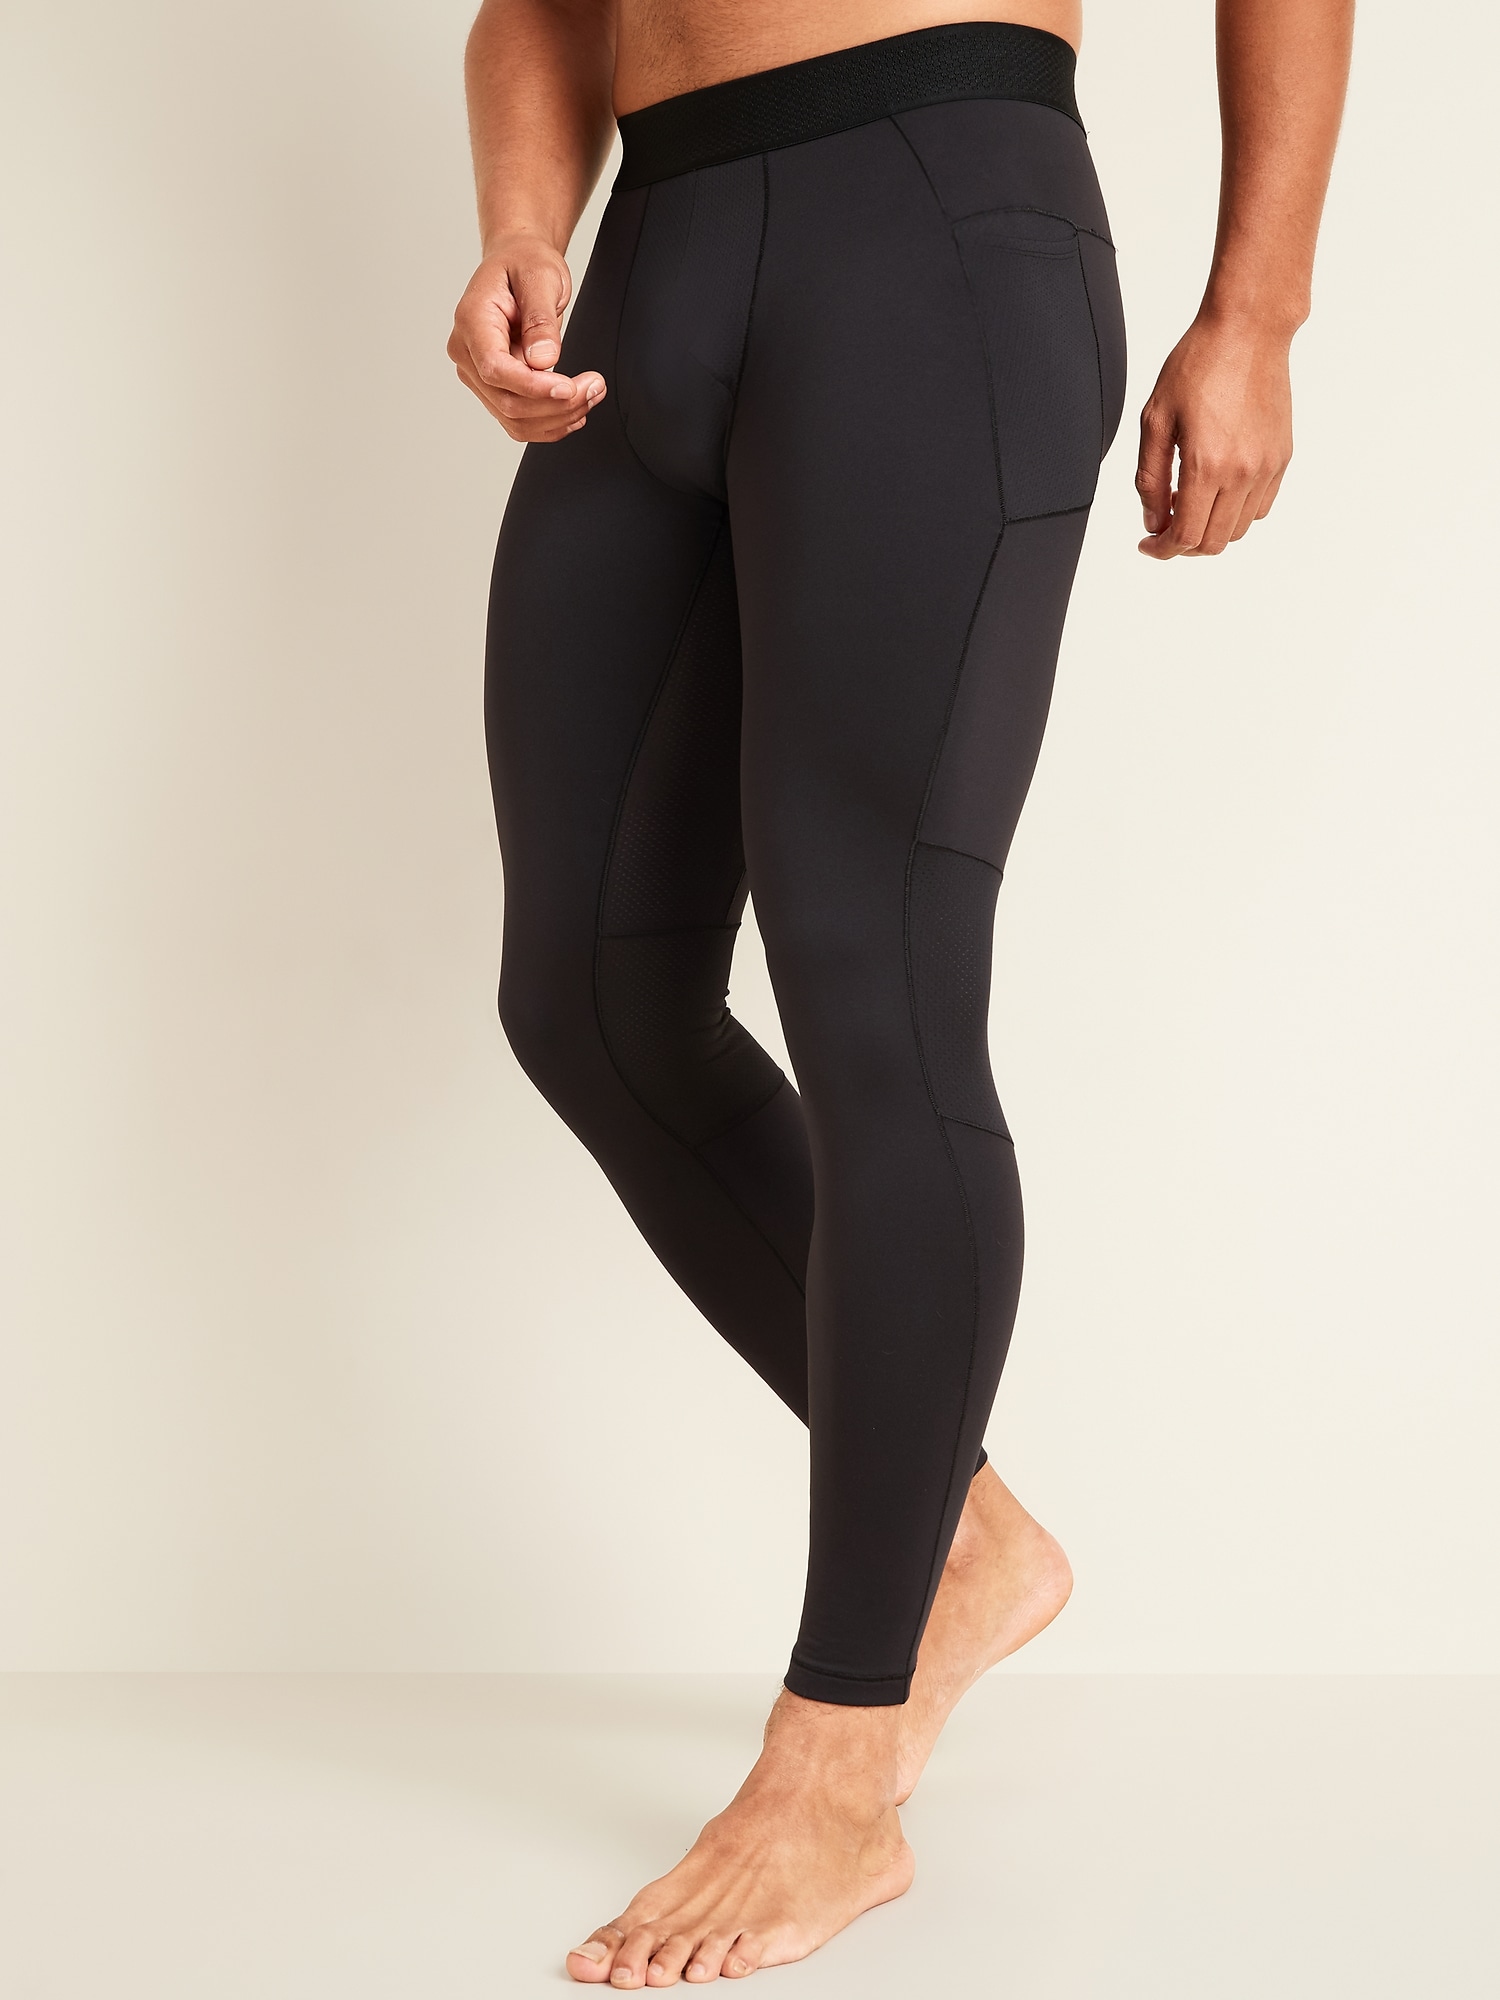 Go-Dry Cool Odor-Control Base Layer Tights